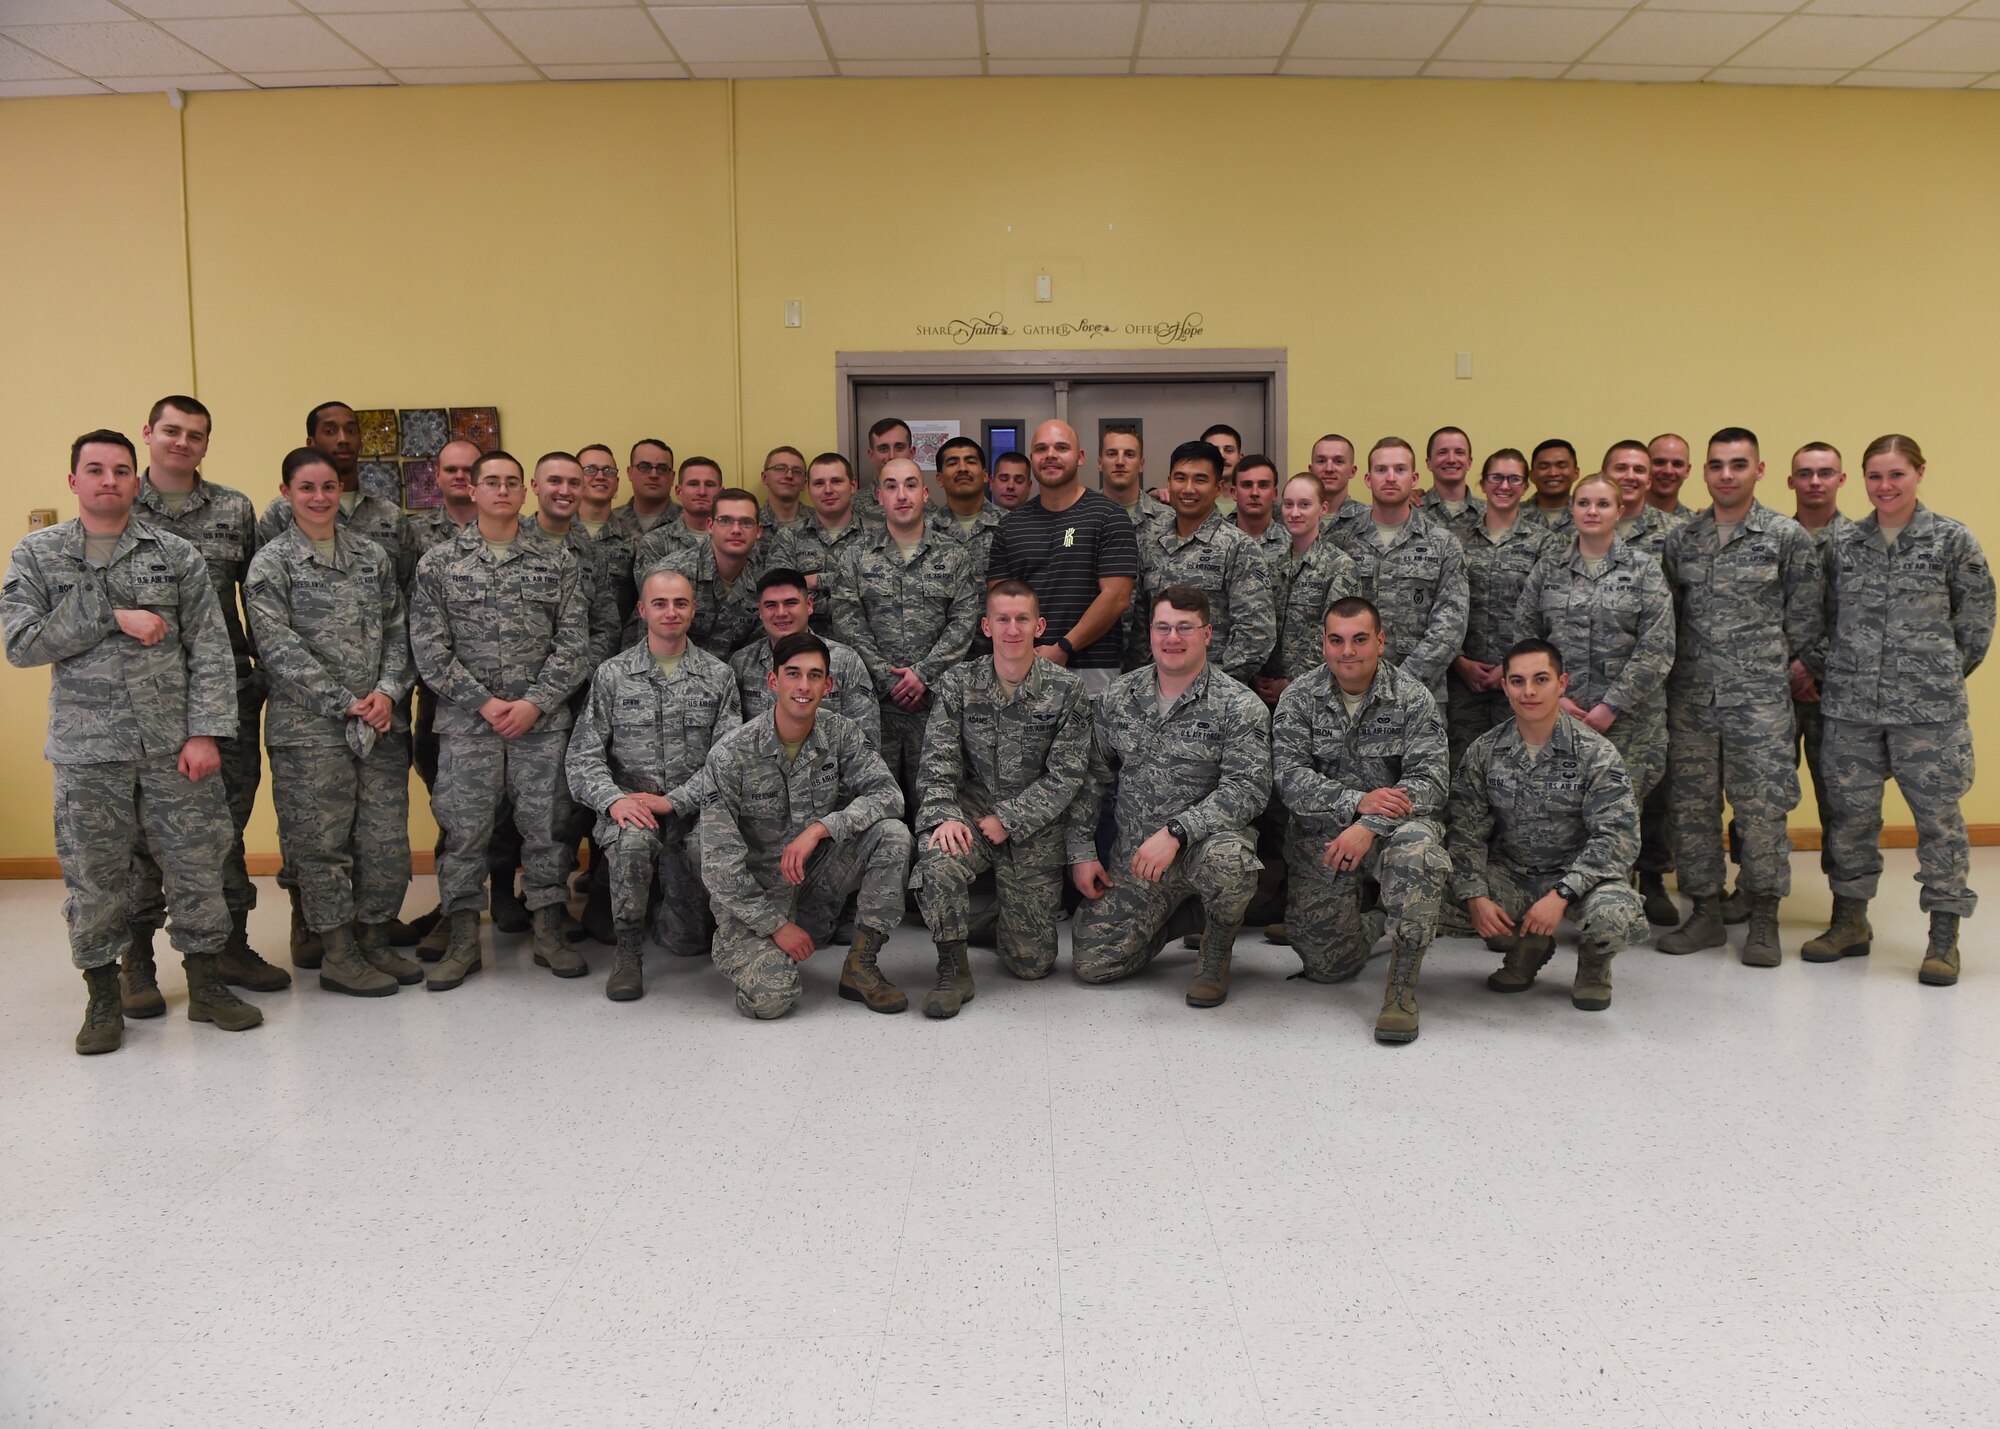 Chad Johnson, the Pittsburgh Steelers chaplain, poses with the Airmen Leadership School class at the base chapel Holloman Air Force Base, N.M. Feb. 9. Johnson visited the chapel to show his support by having lunch with the ALS class and spoke about his experience being an NFL chaplain. (U.S. photo by Senior Airman Leah Ferrante) 